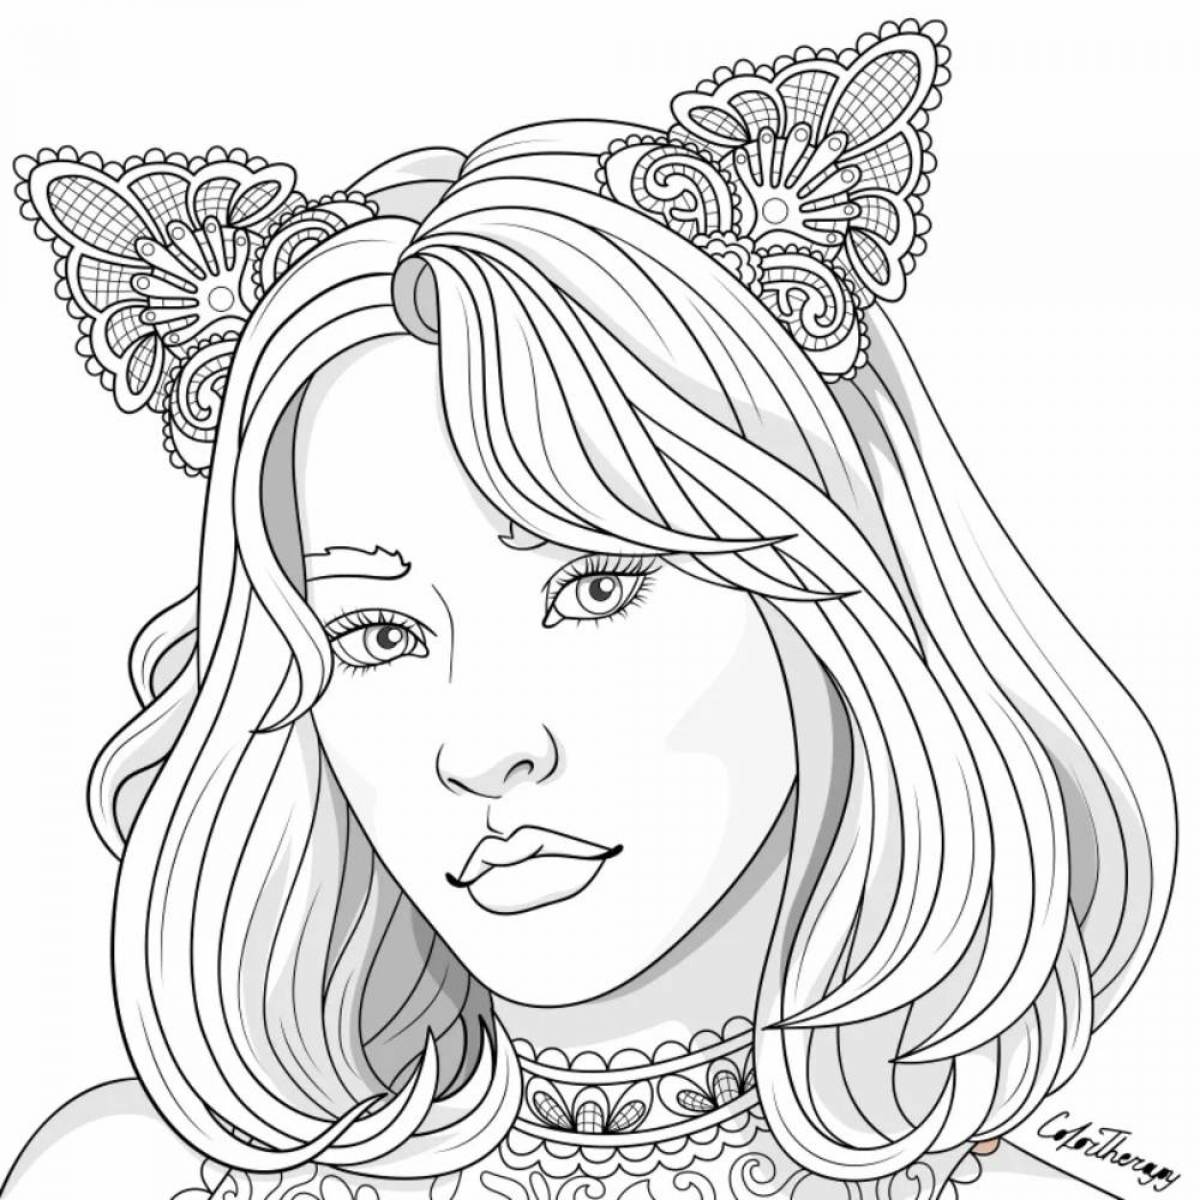 Amazing 18 year old coloring book for girls